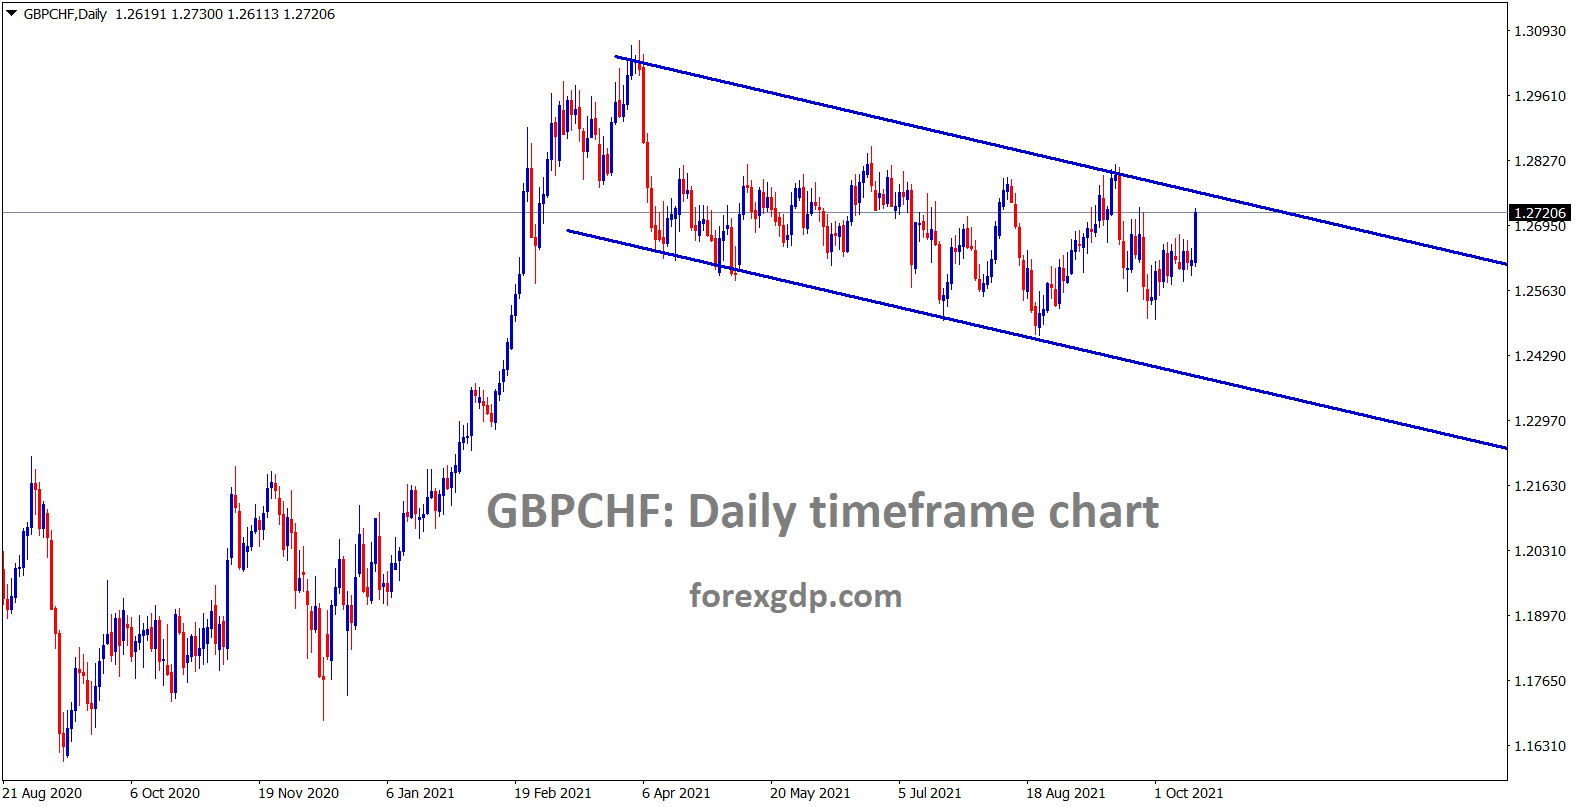 GBPCHF is moving in a channel range